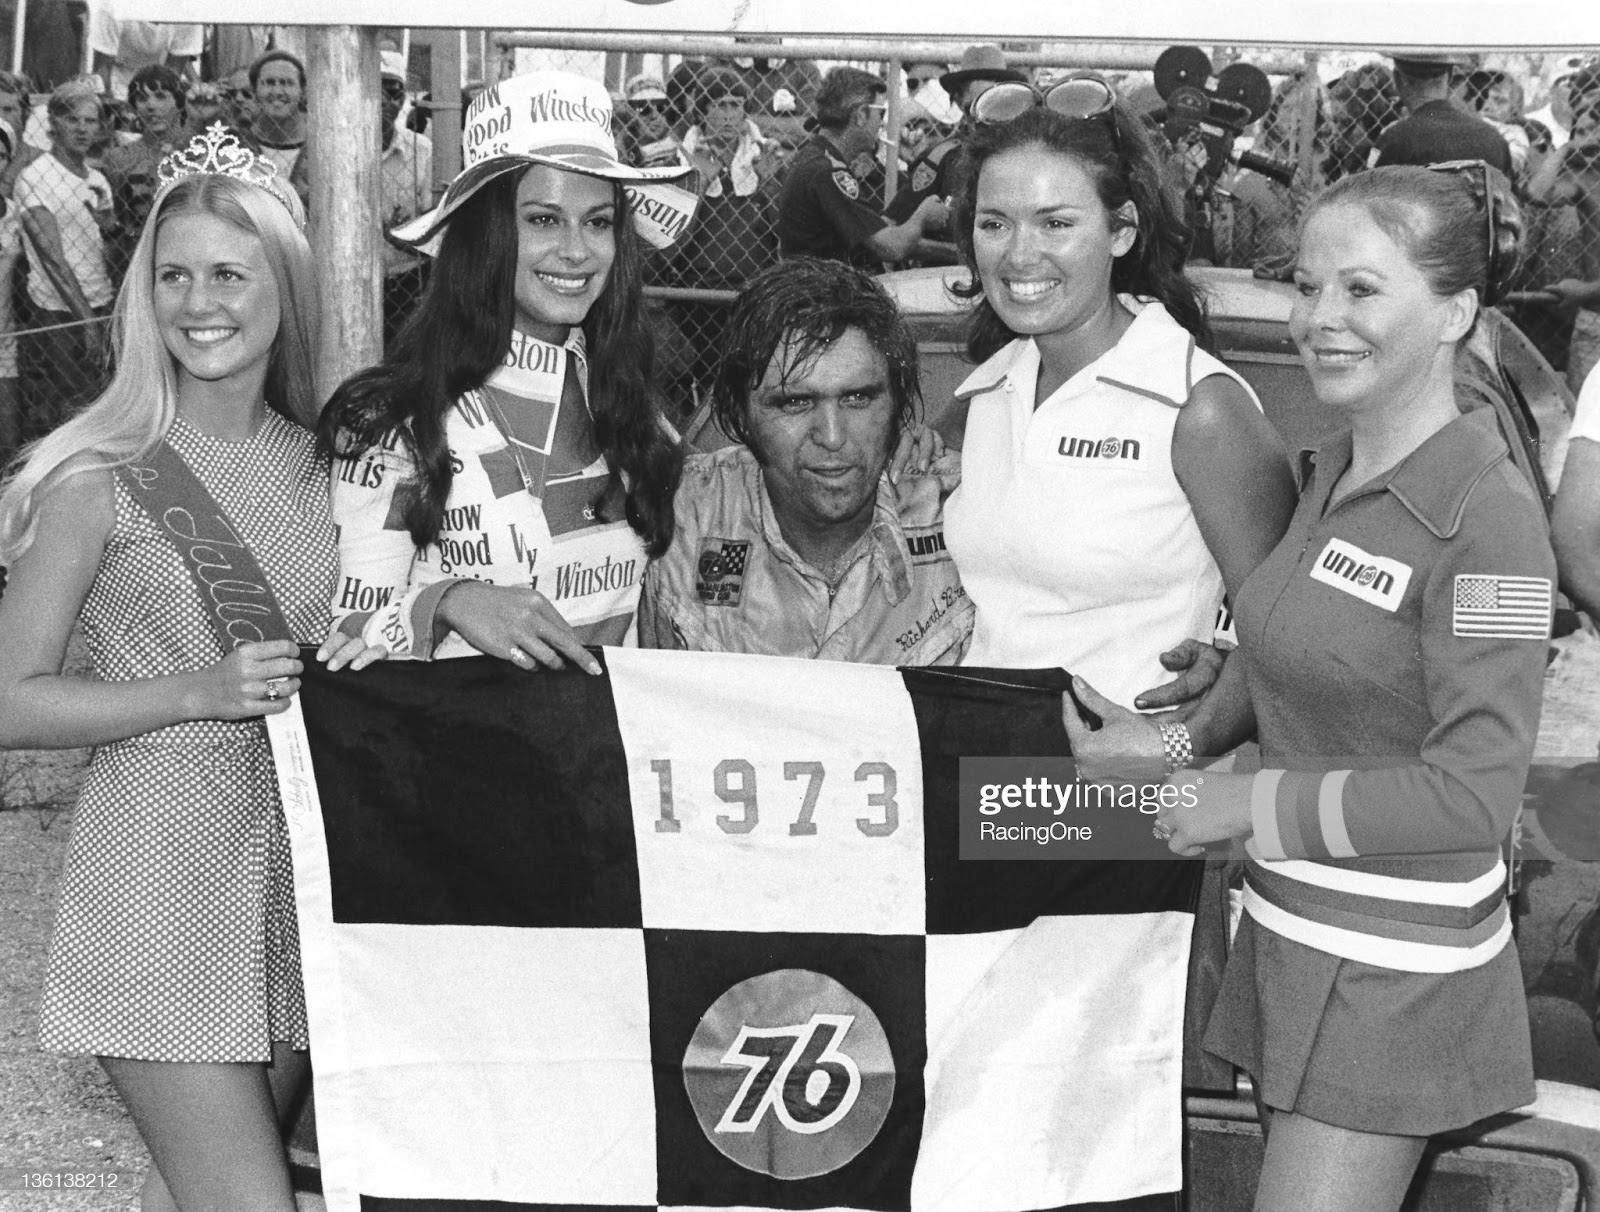 D:\Documenti\posts\posts\Women and motorsport\foto\Getty e altre\august-12-1973-a-tired-dick-brooks-is-joined-by-a-bevy-of-race-queens-picture-id136138212.jpg